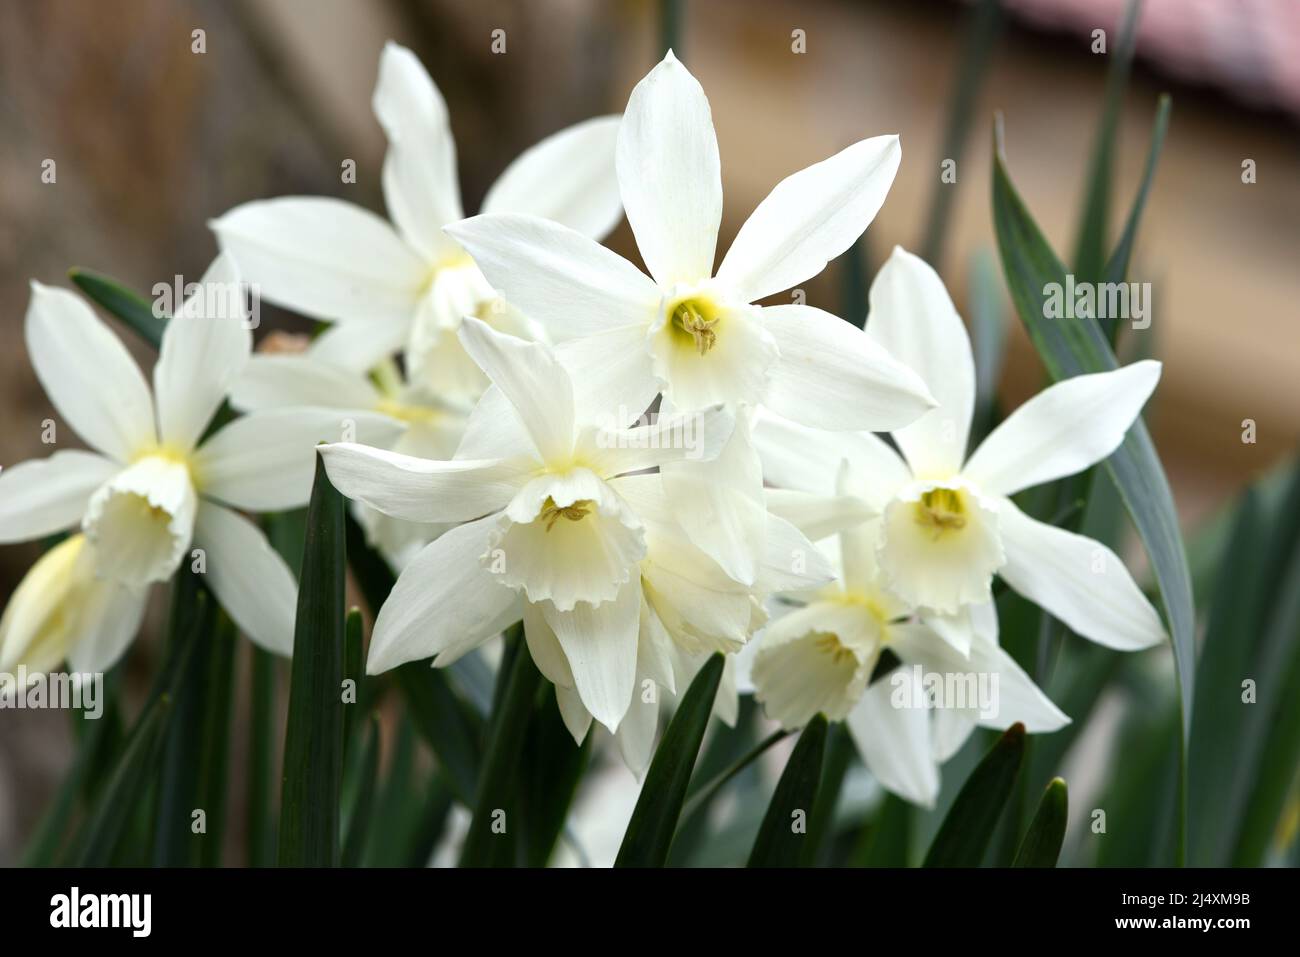 A cluster of white flowers of Thalia narcissus. Stock Photo